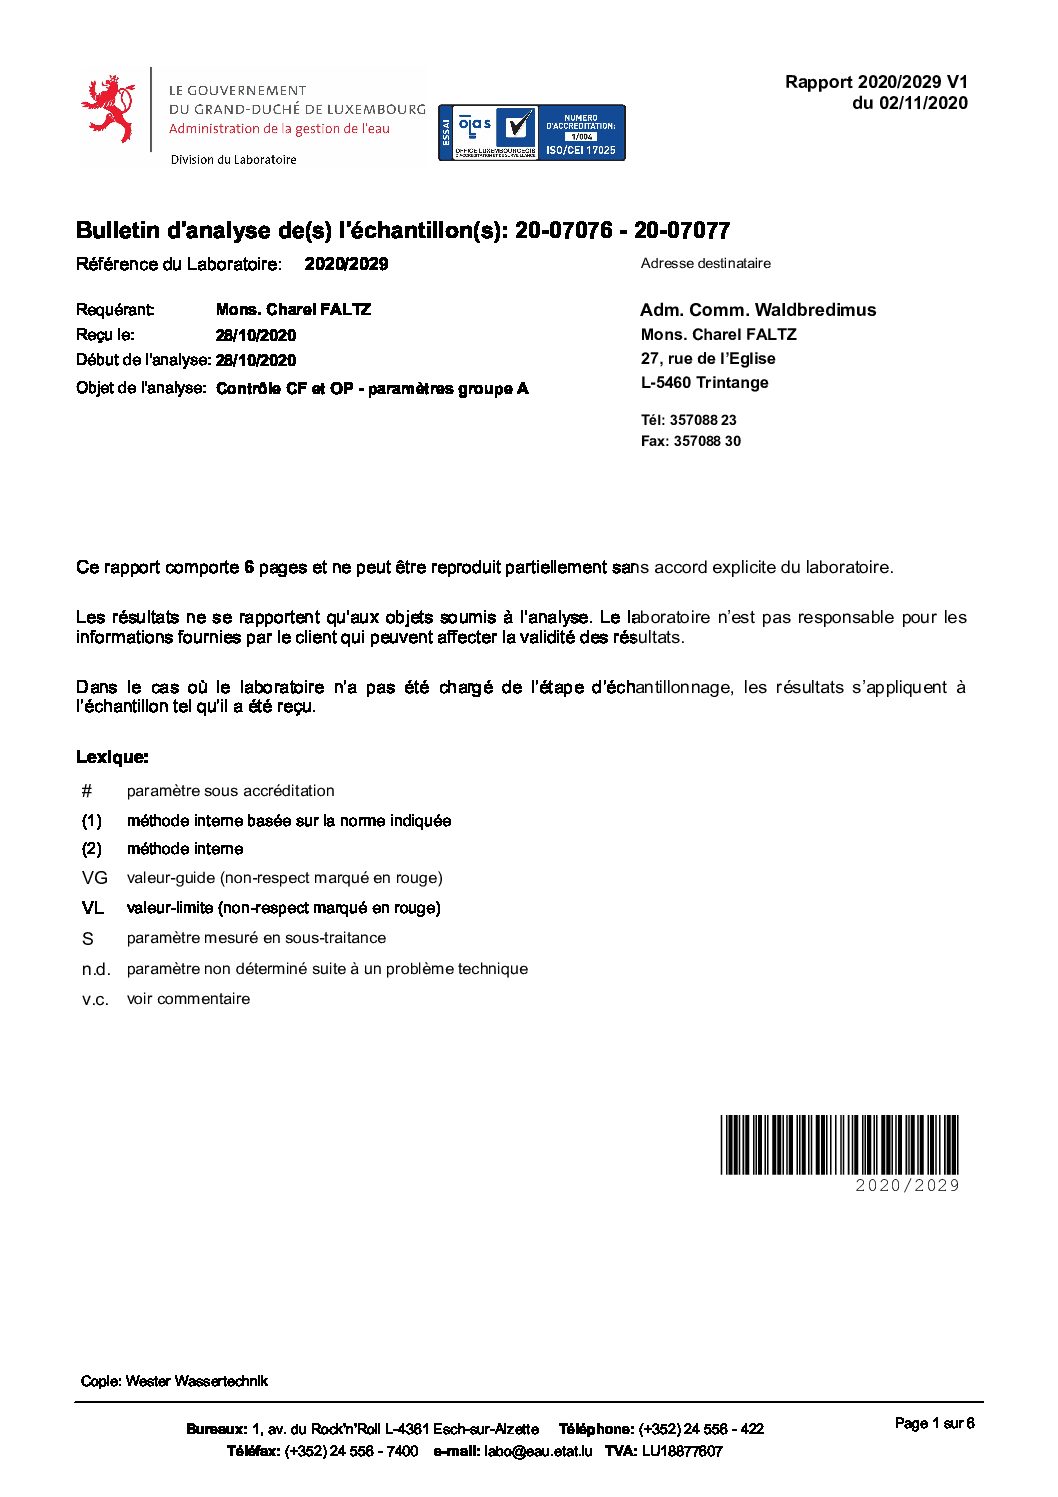 Rapport AGE 02.11.2020